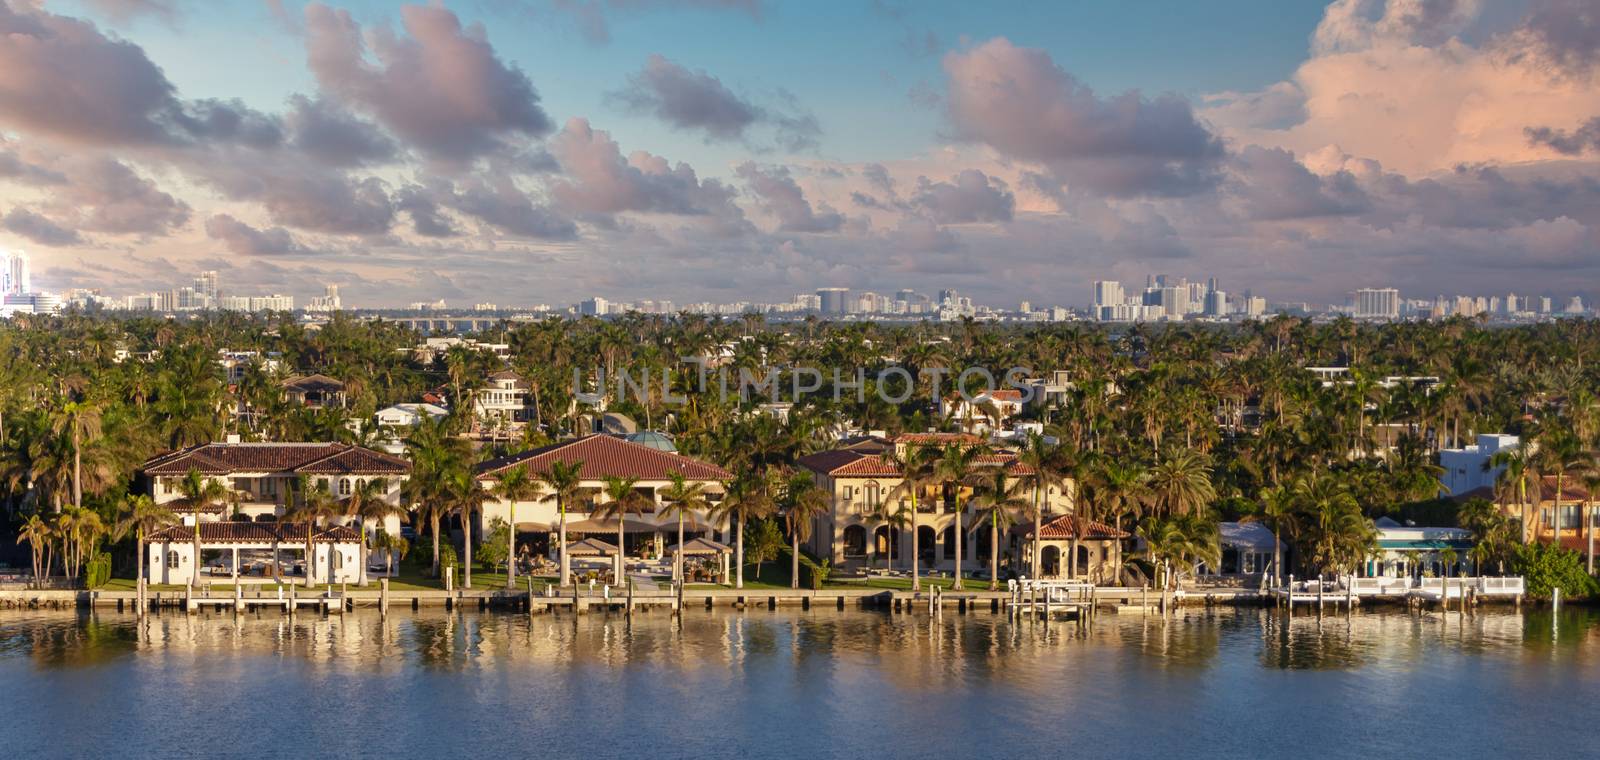 Mansions by Miami Shipping Channel by dbvirago